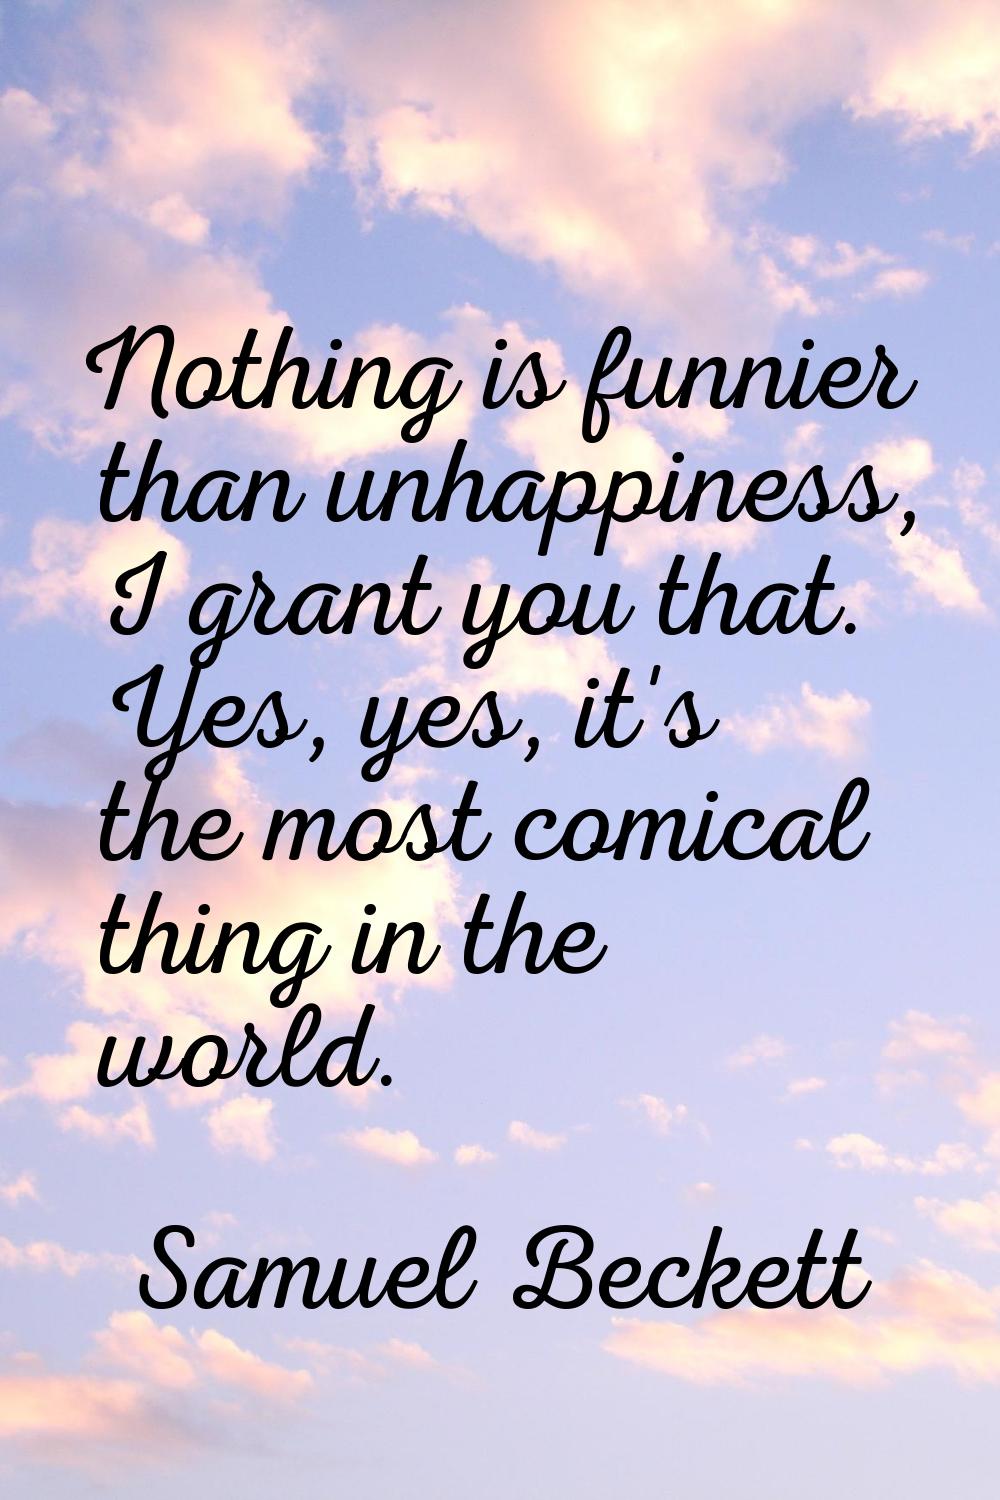 Nothing is funnier than unhappiness, I grant you that. Yes, yes, it's the most comical thing in the